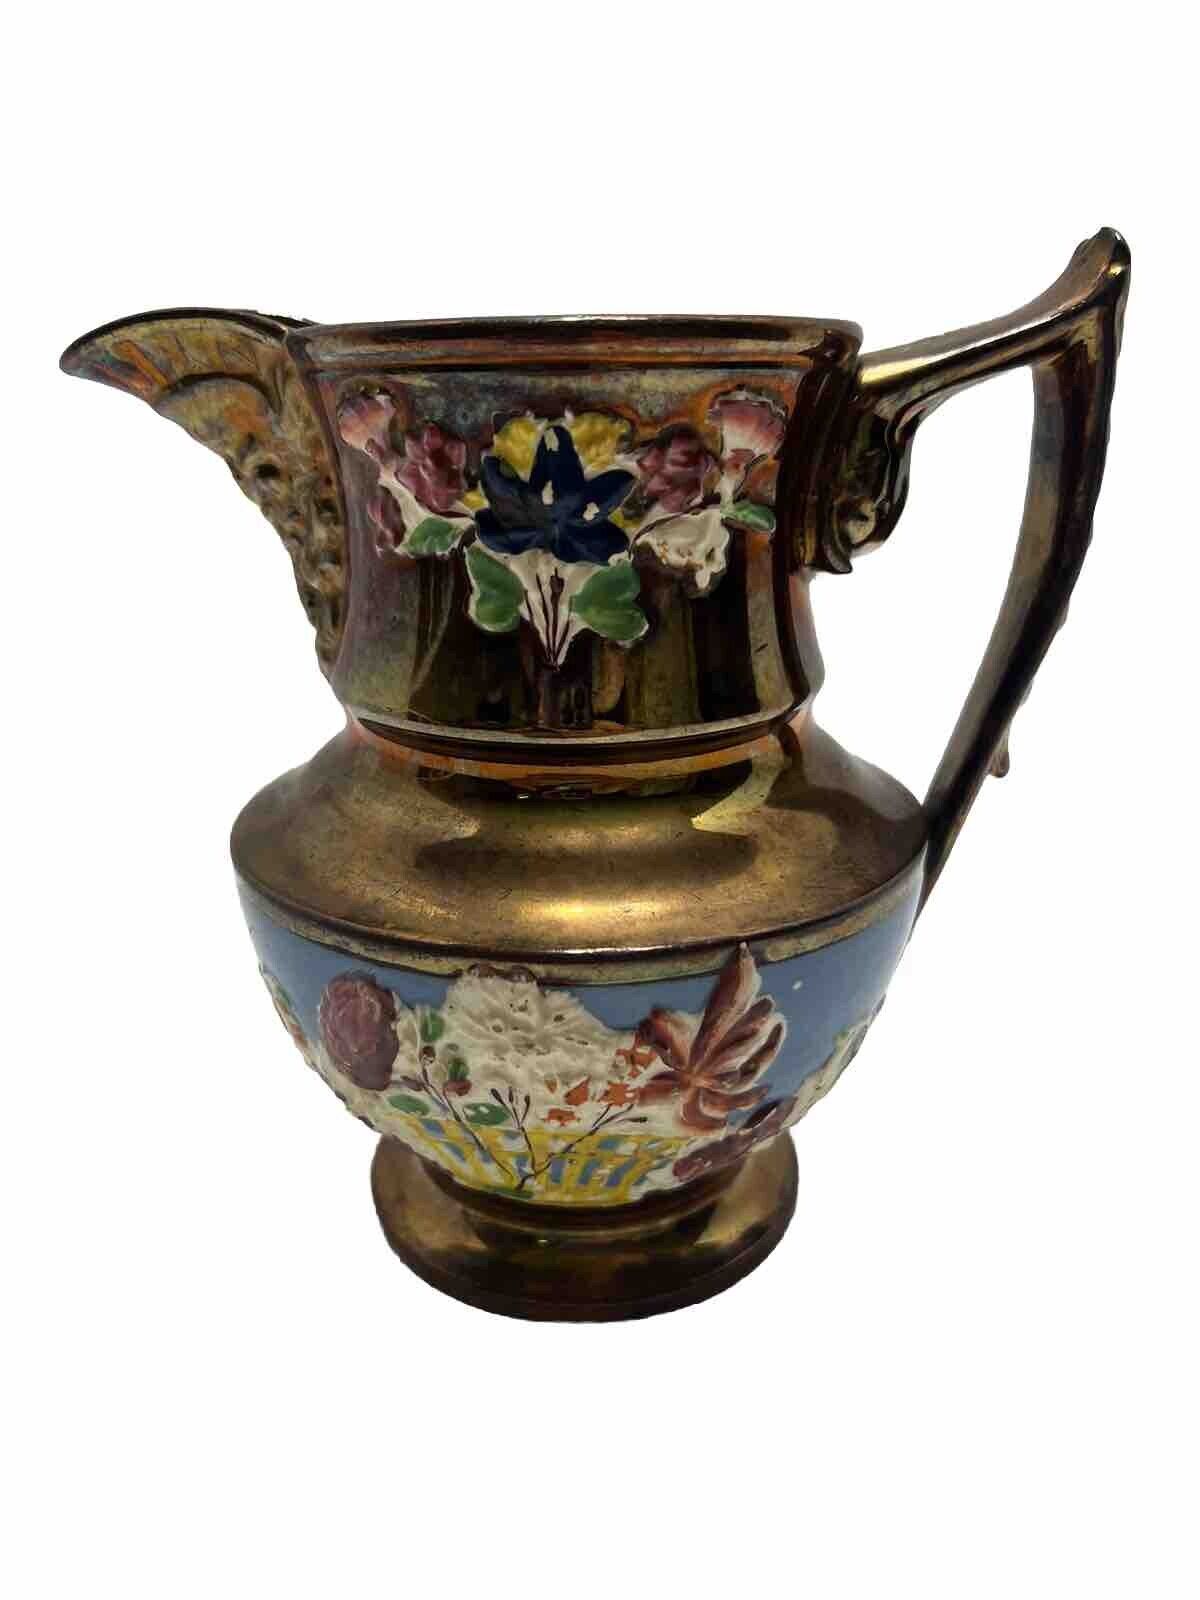 Antique English Copper Lustre Jug with Mask Spout Dolphin Handle & Flowers